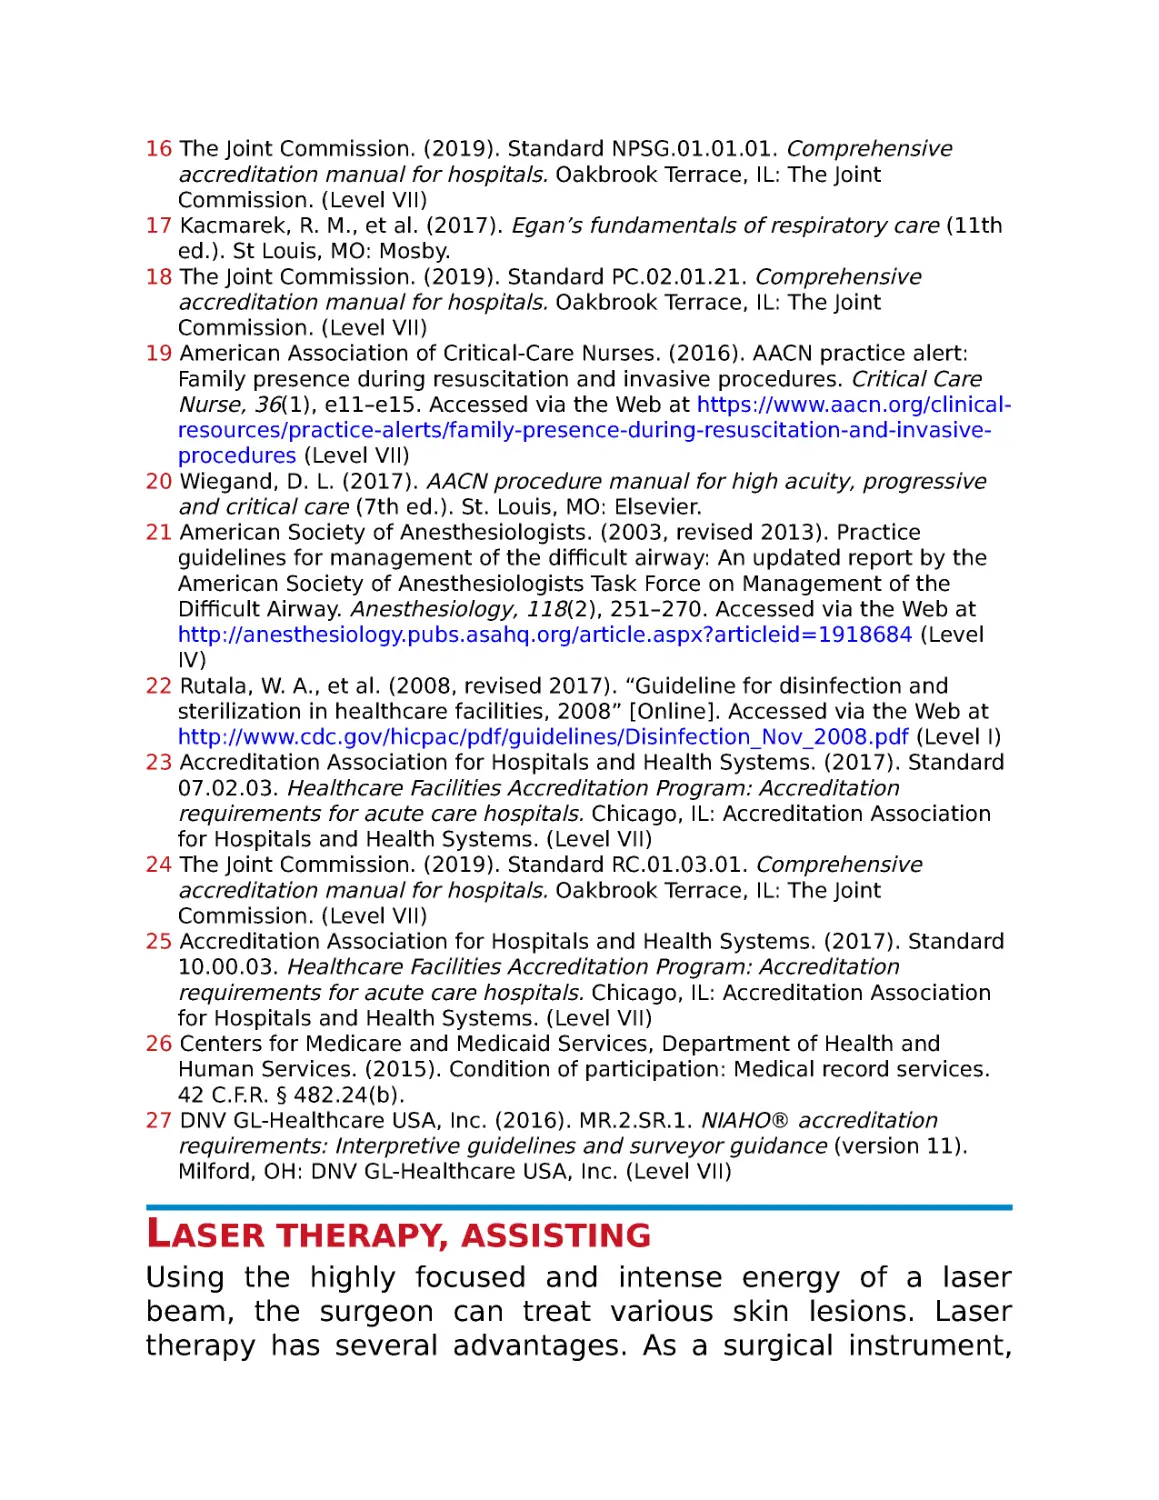 Laser therapy, assisting